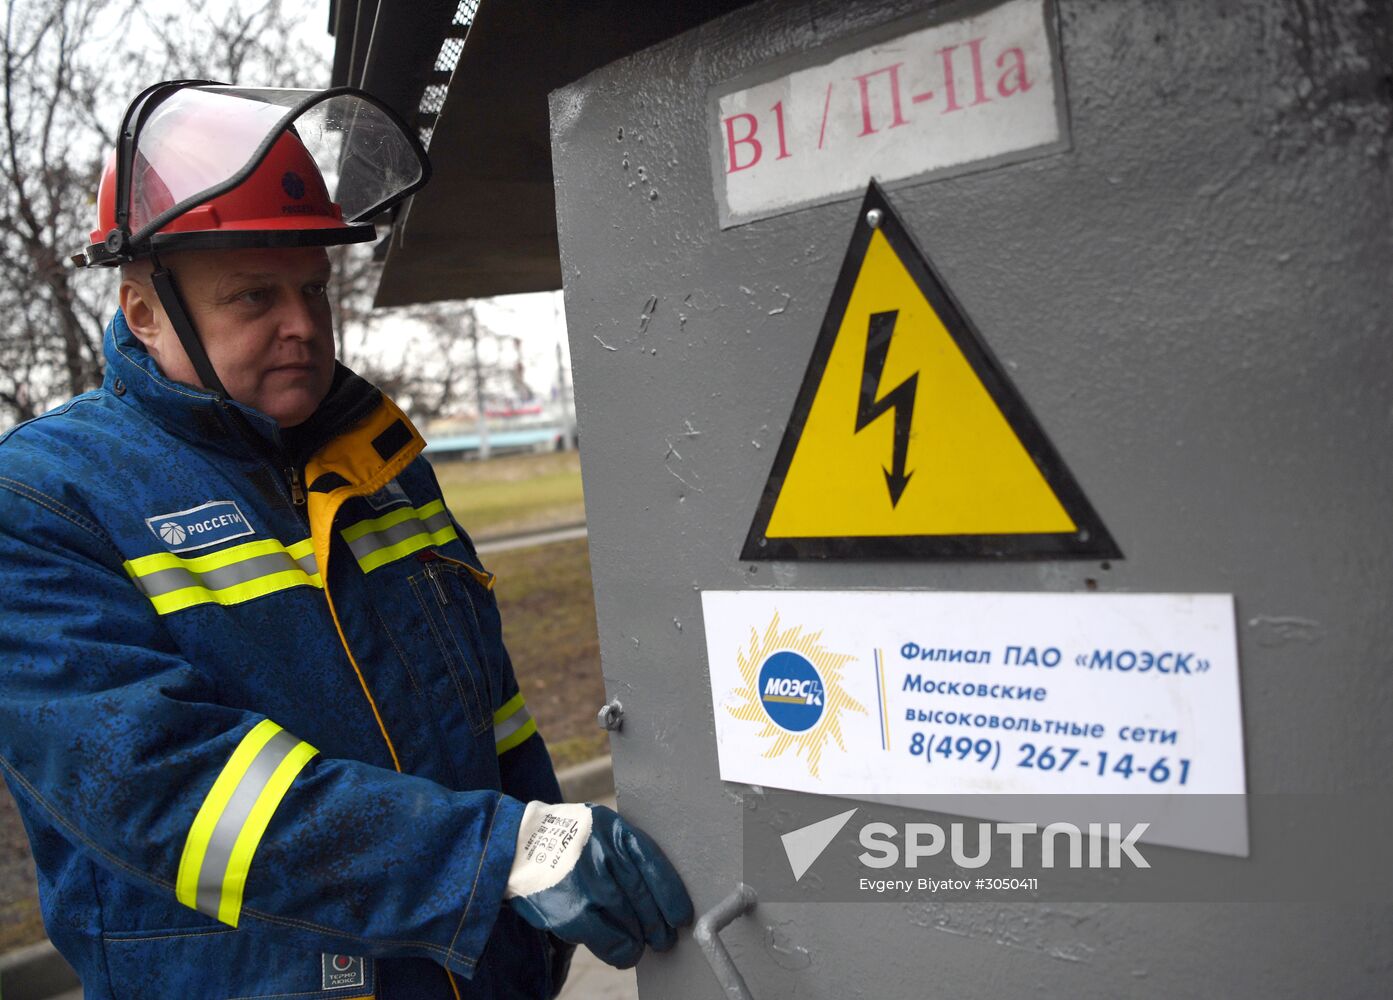 Energy workers work in Moscow's underground facilities